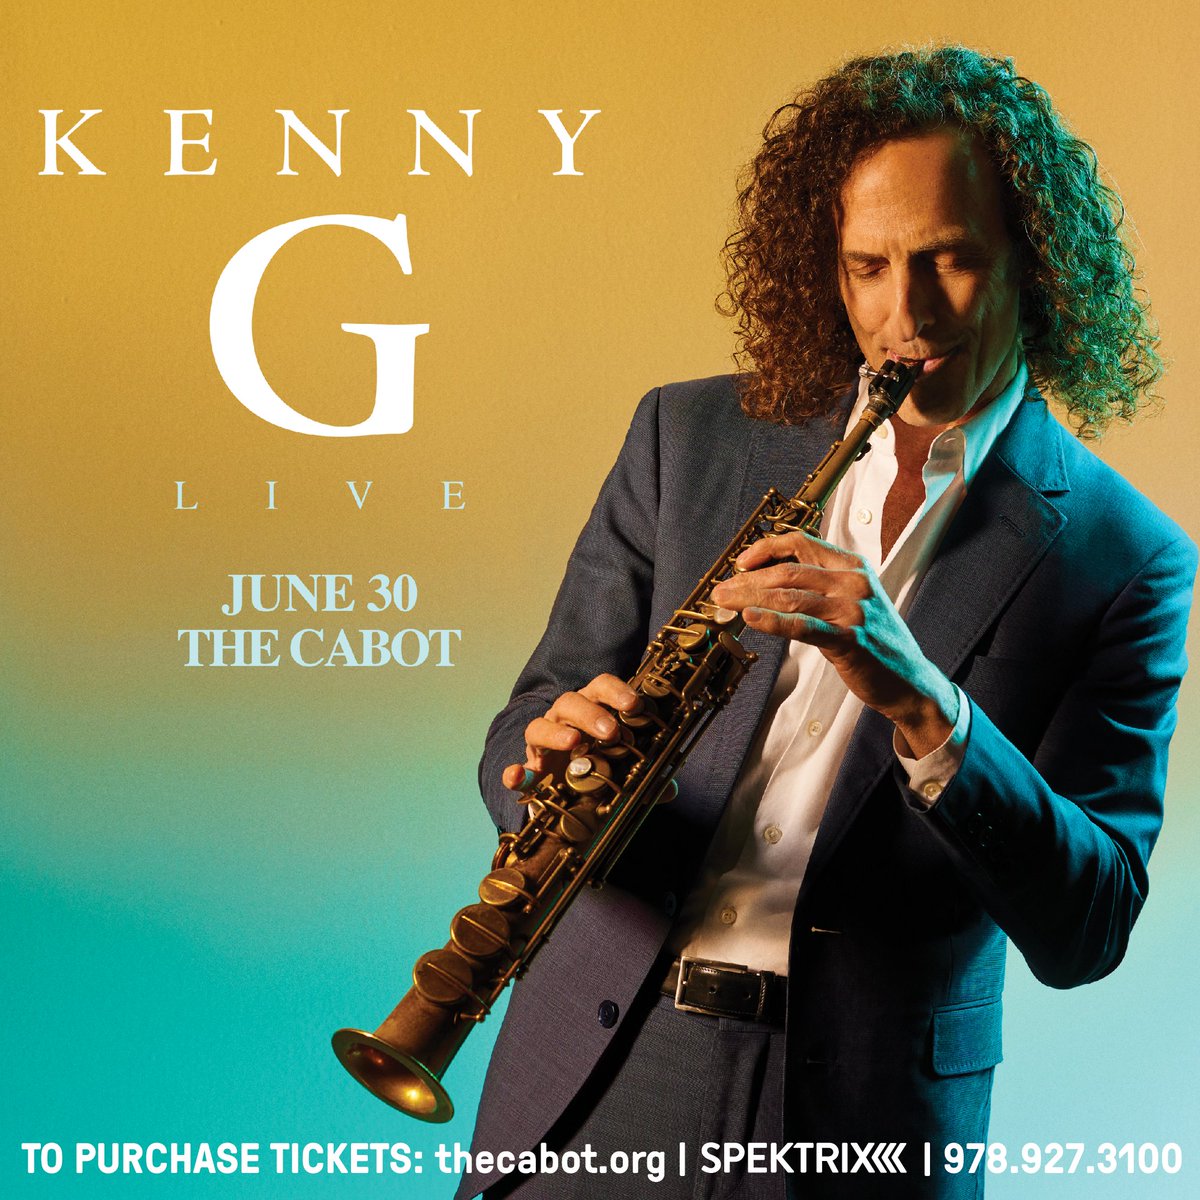 Still great seats available! Get ready to immerse yourself in smooth jazz bliss as the legendary @kennyg takes the stage at The Cabot on June 30 🎷✨ Tickets: thecabot.org/event/kenny-g